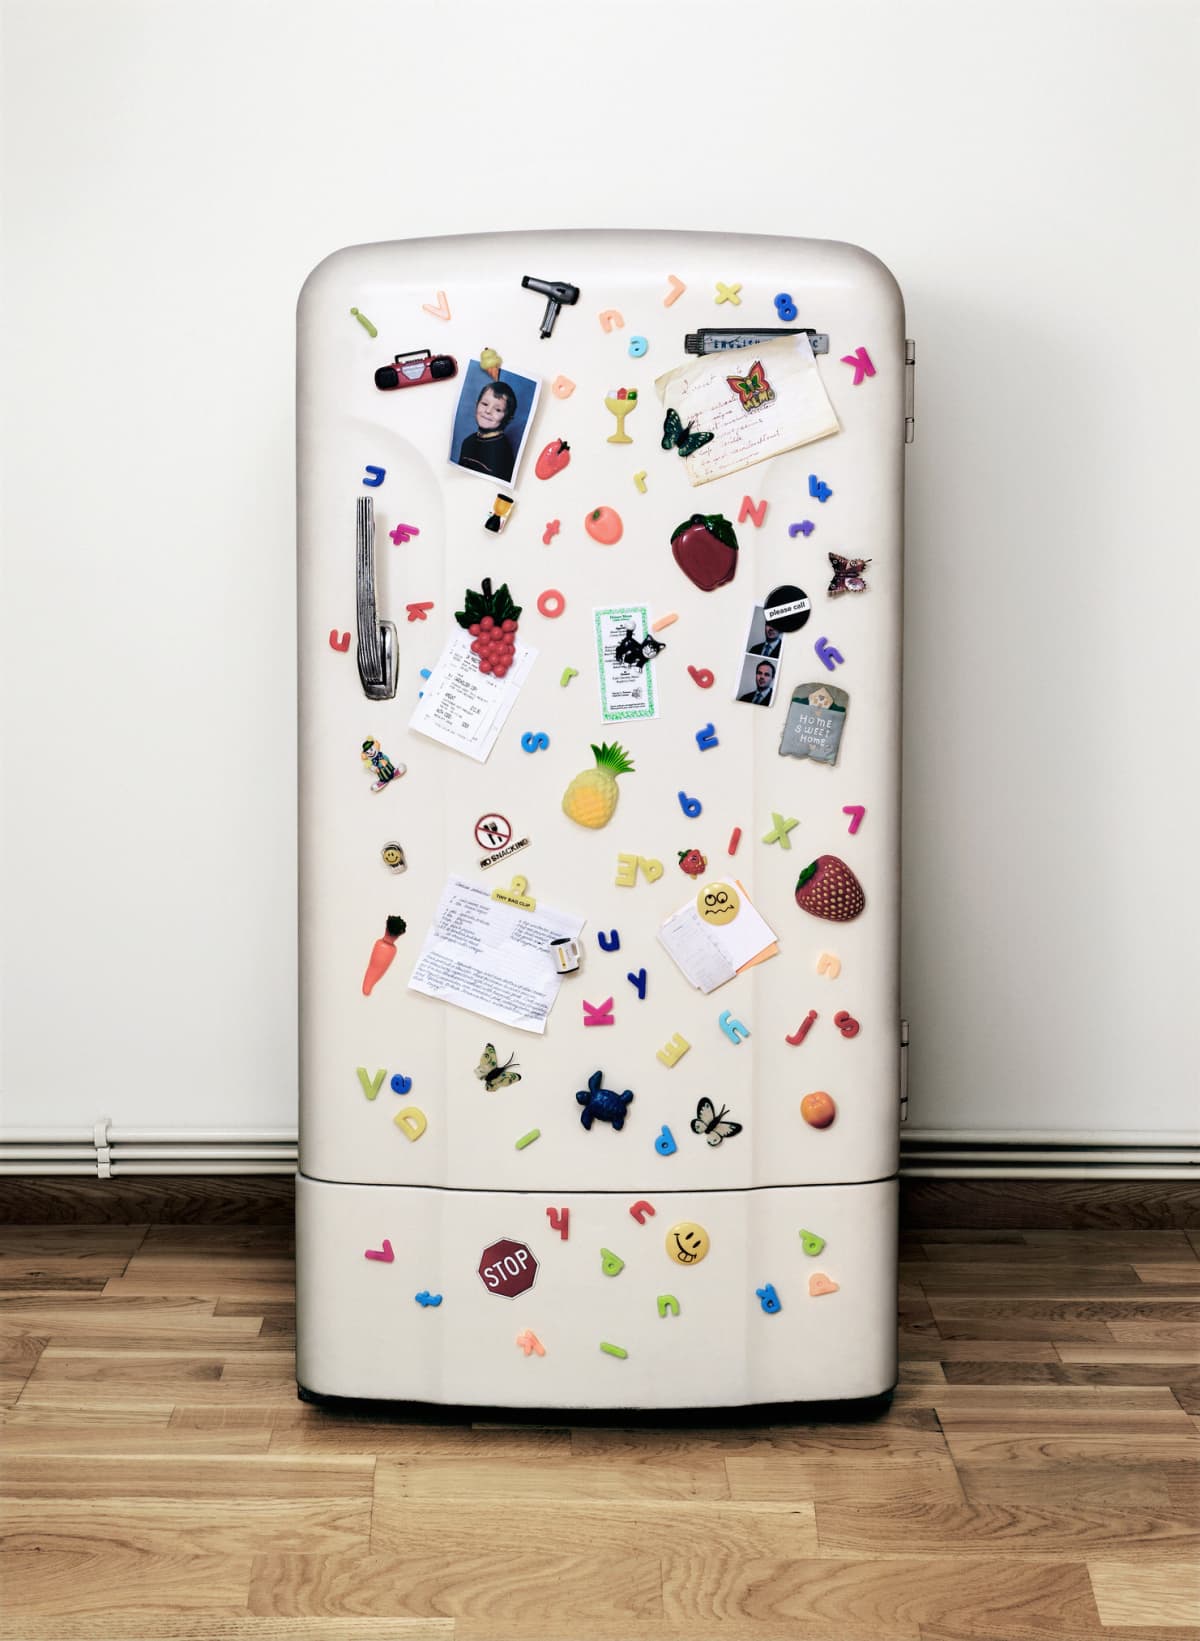 A fridge covered in notes, magnets, and photographs